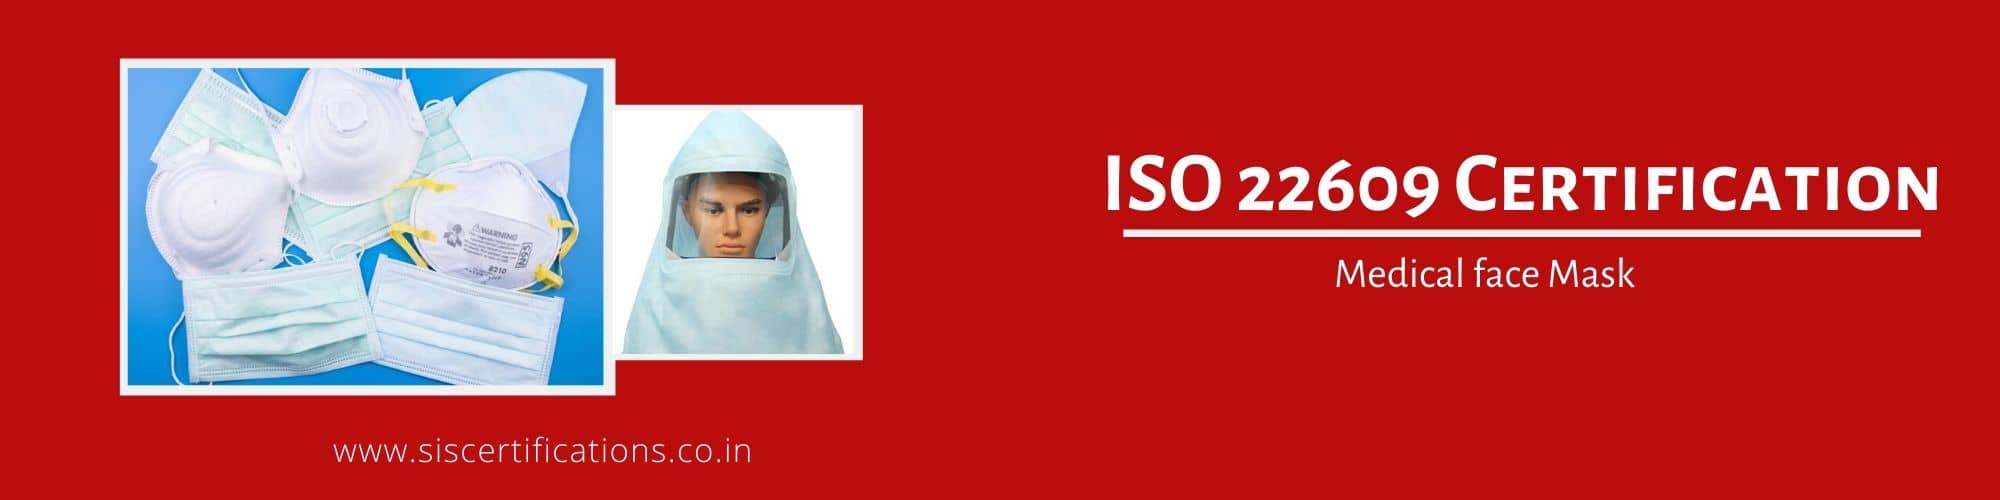 ISO 22609 Certification